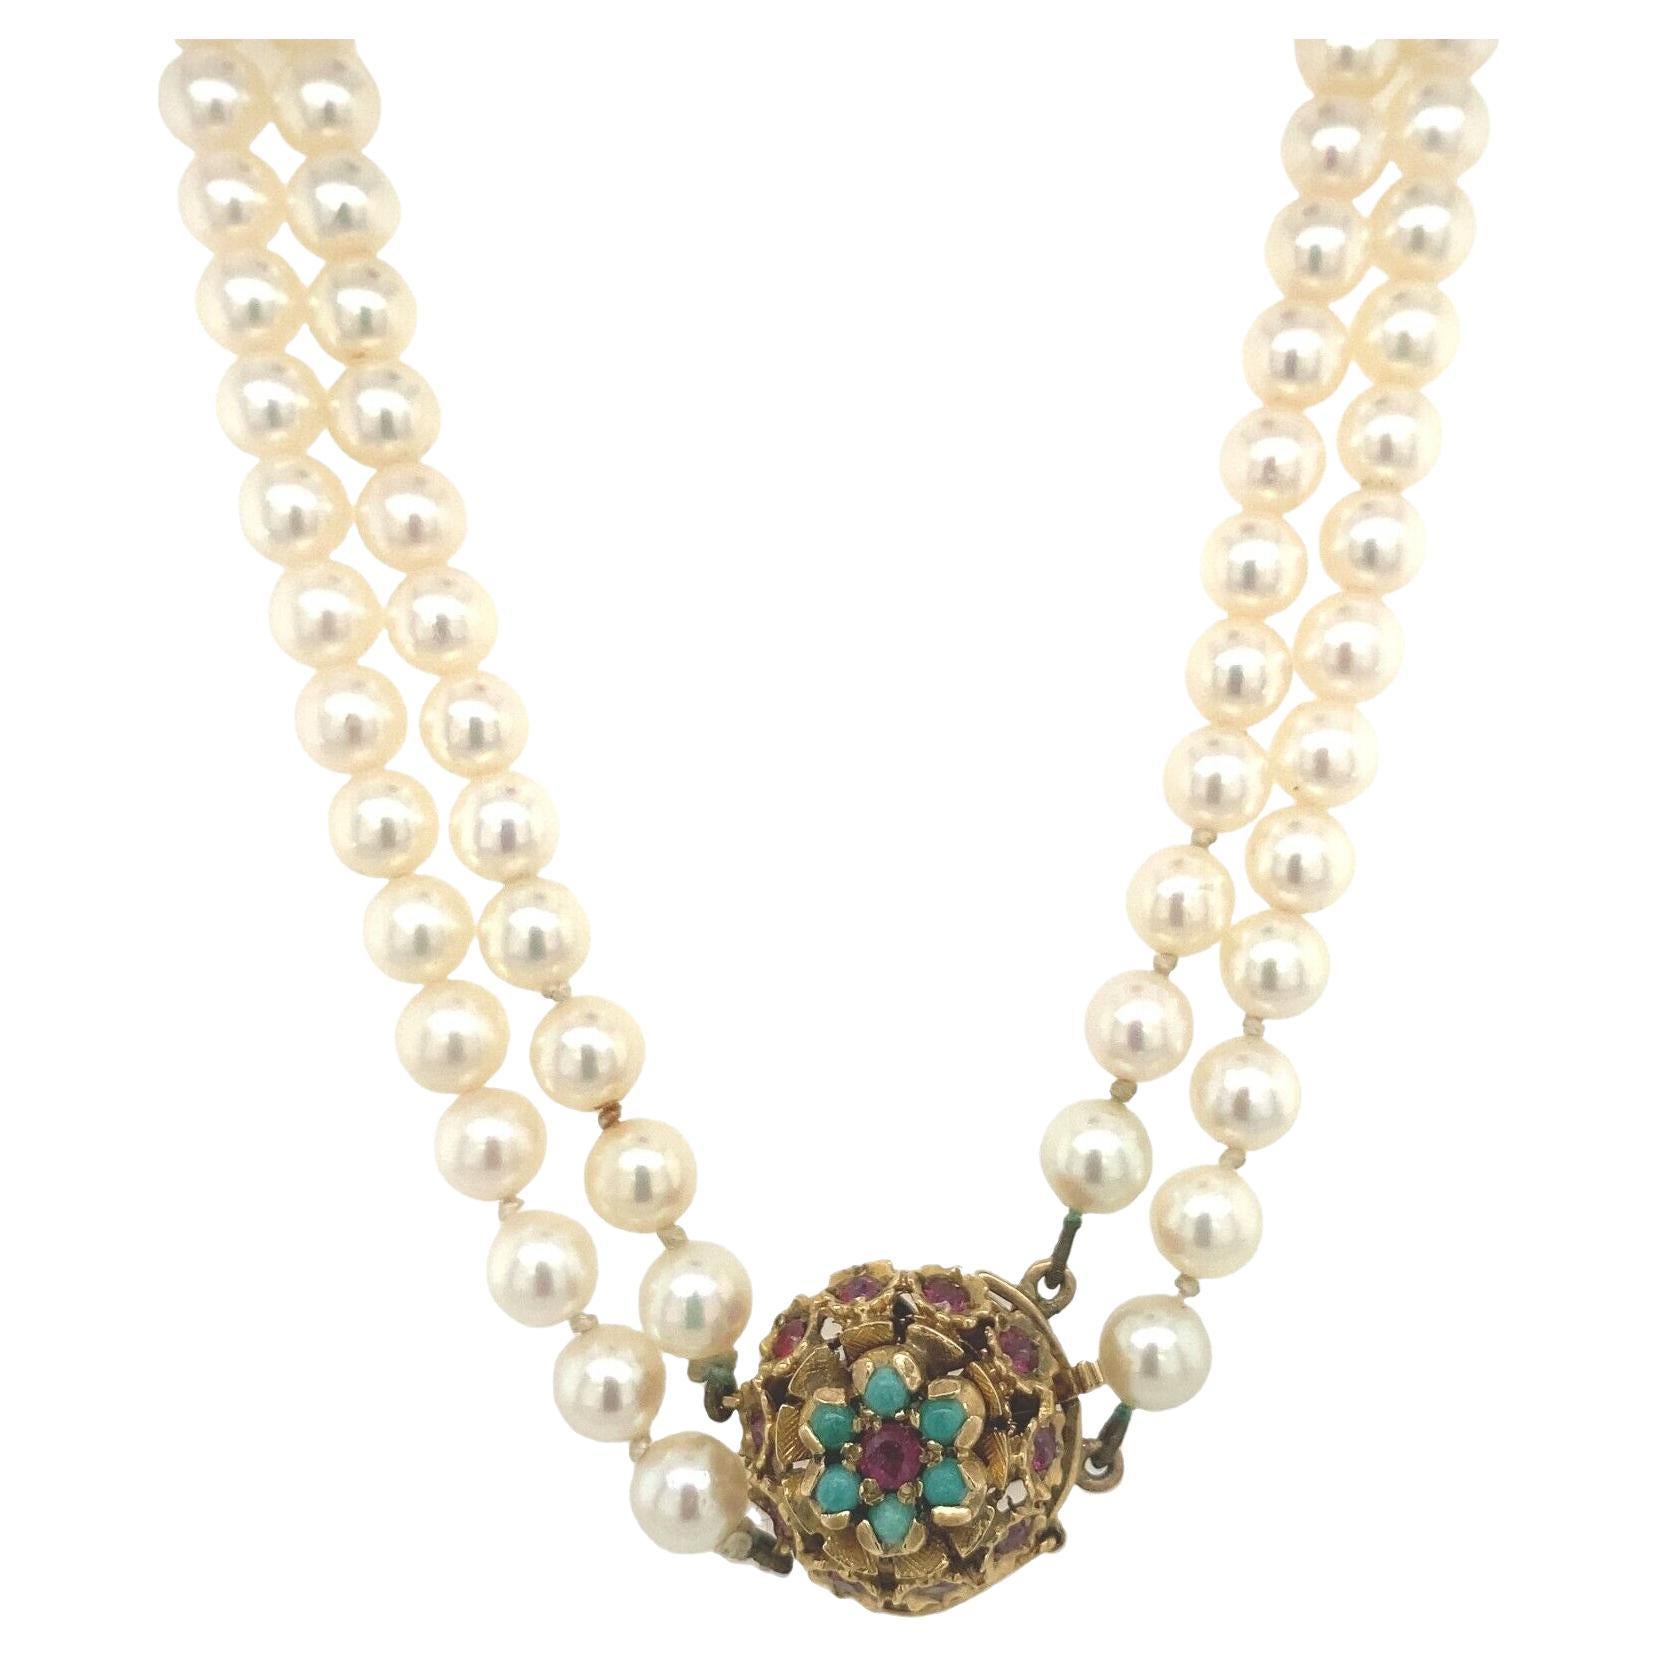 2 Row Uniform Cultured Pearl Necklace, With 9ct Gold Coloured Stone Clasp For Sale